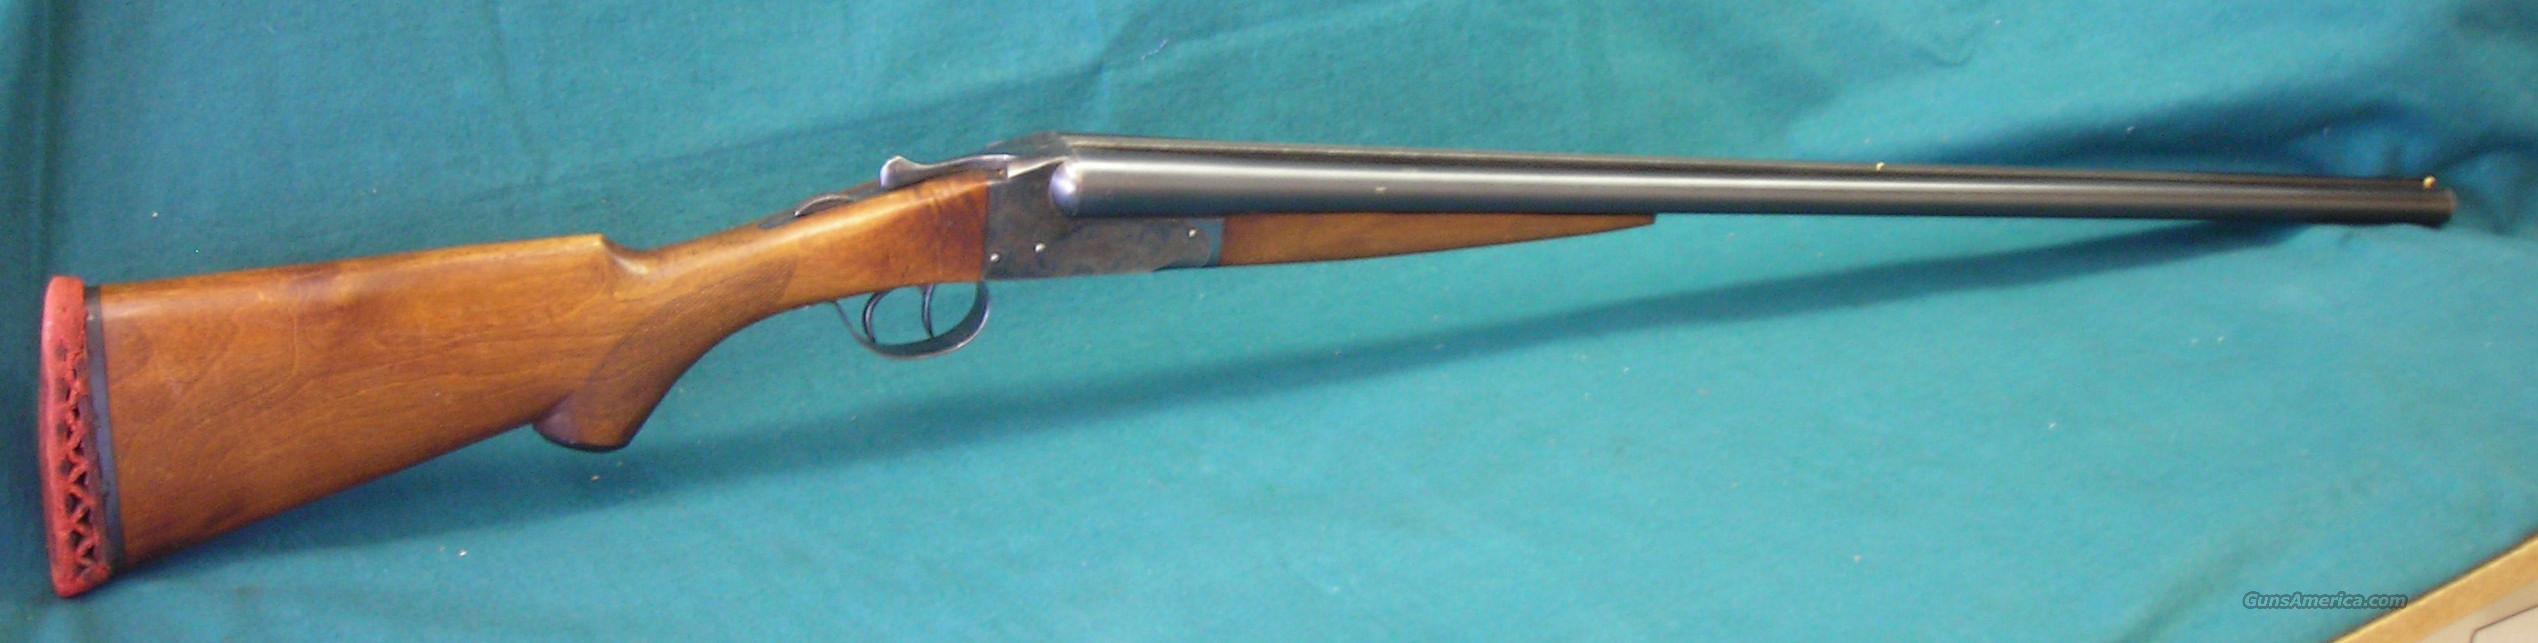 Montgomery Ward Westernfield Deluxe For Sale At Gunsamerica